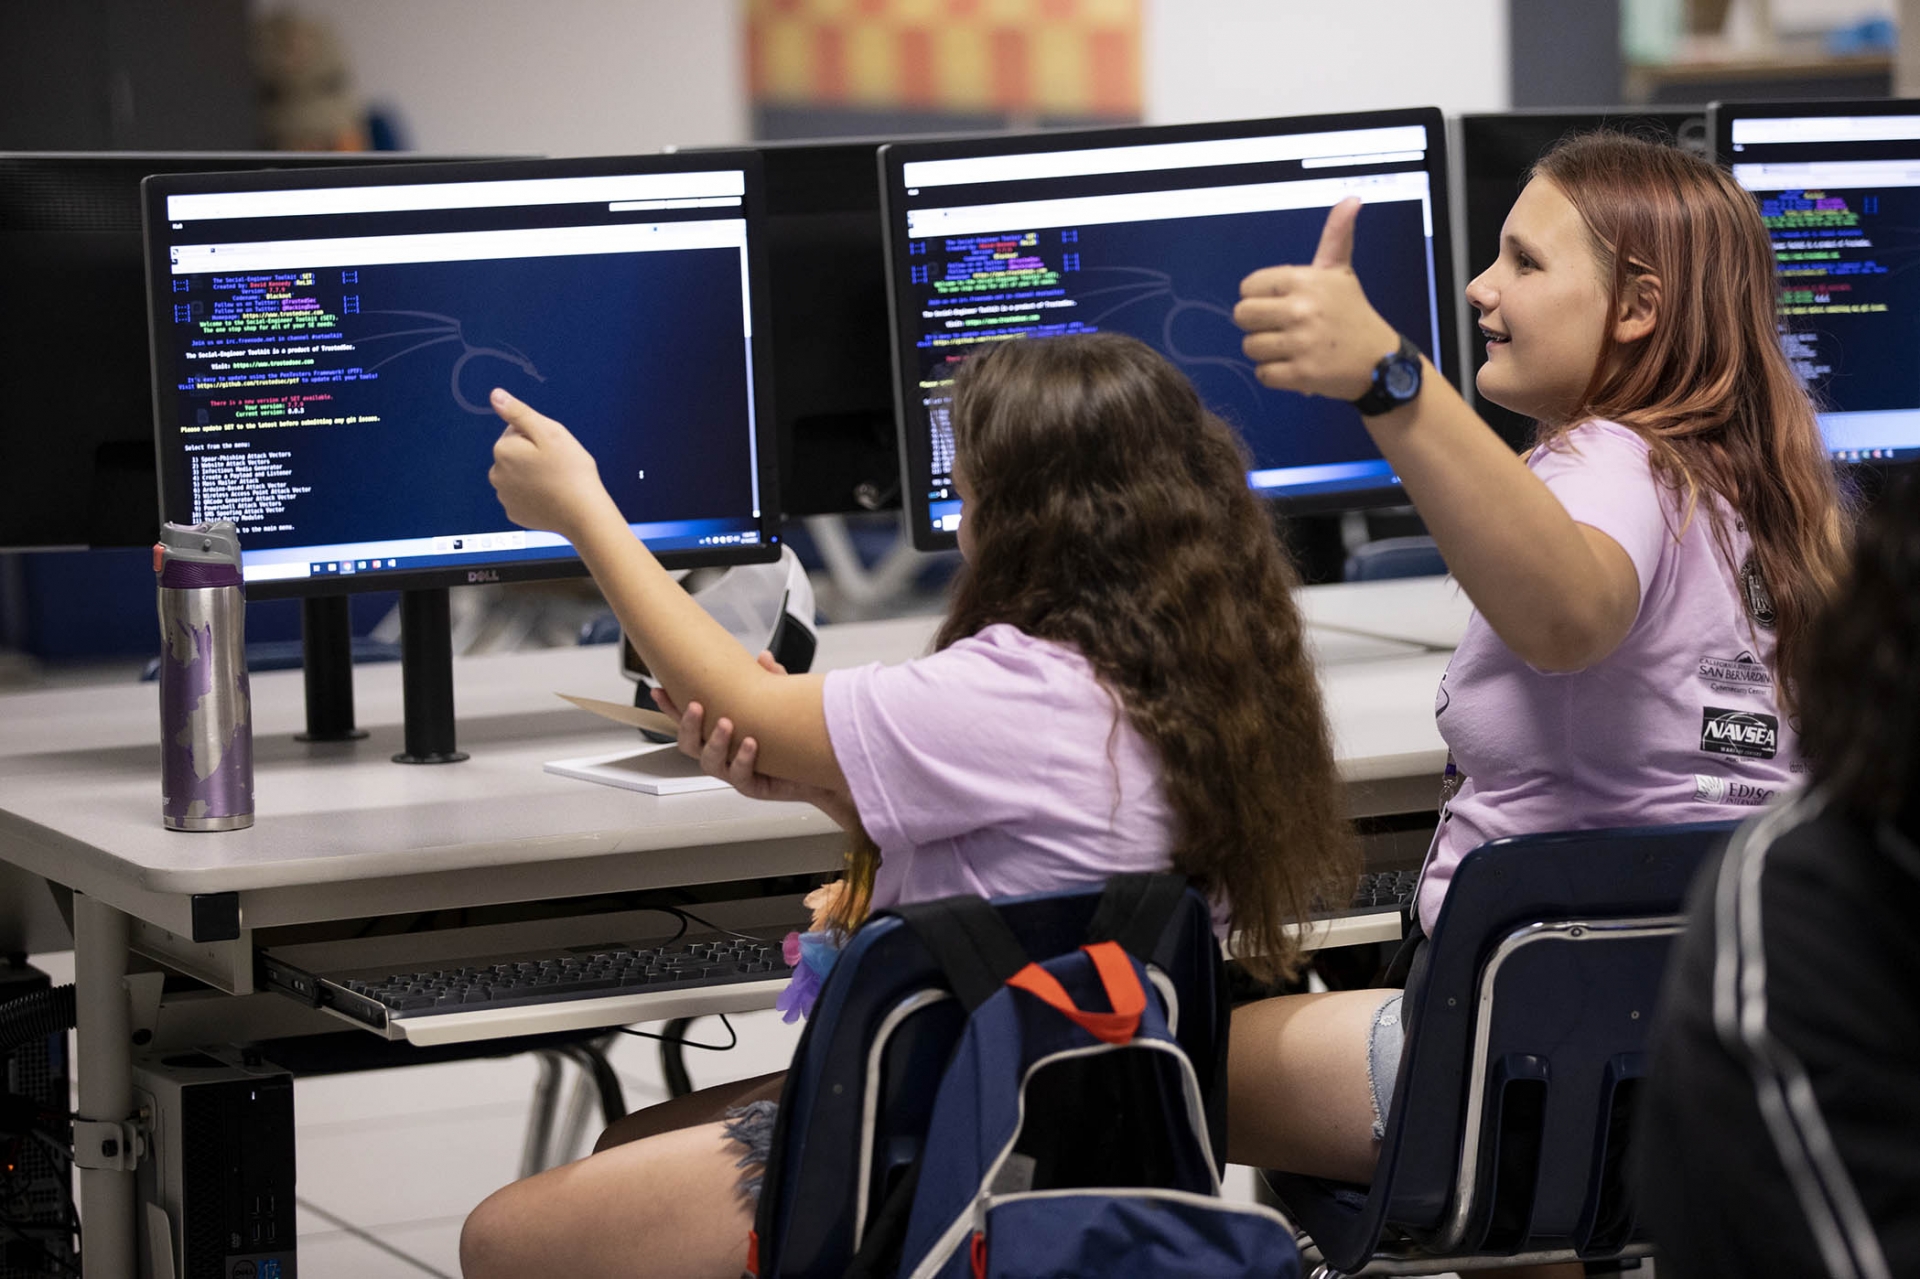 Two GenCyber Camp participants give a thumbs up.